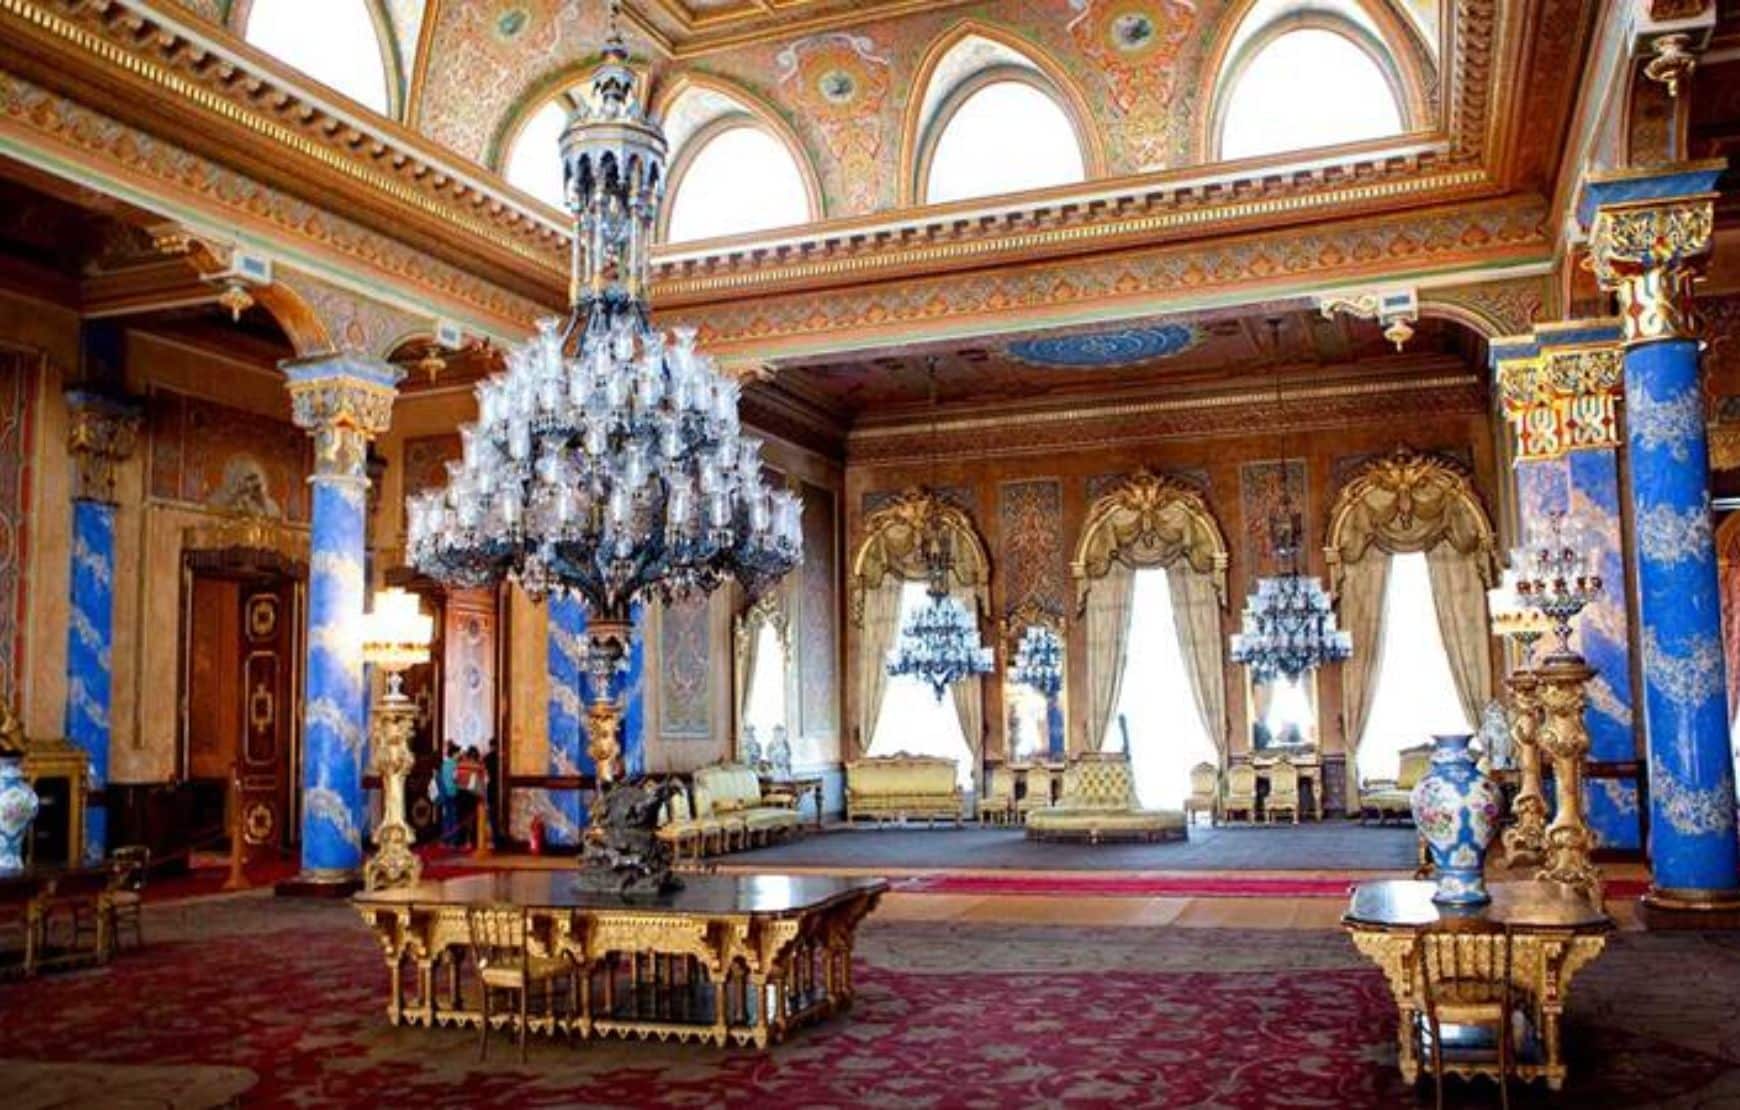 Visit inside of Beylerbeyi Palace during our Istanbul Two Continents Tour